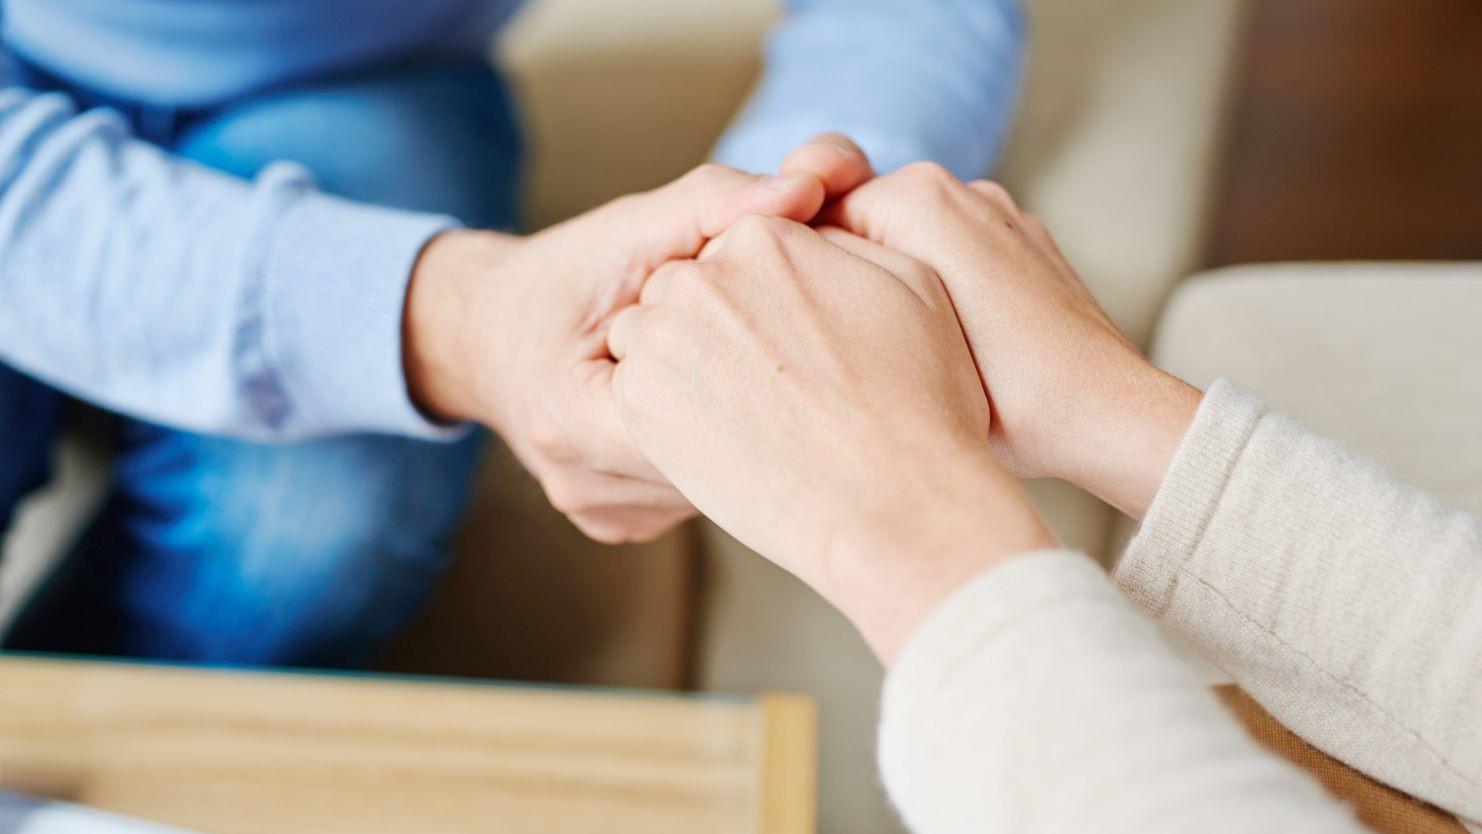 Close-up of a professional comforting a client by holding their hands during a consultation, symbolizing support and guidance in tax-related matters.